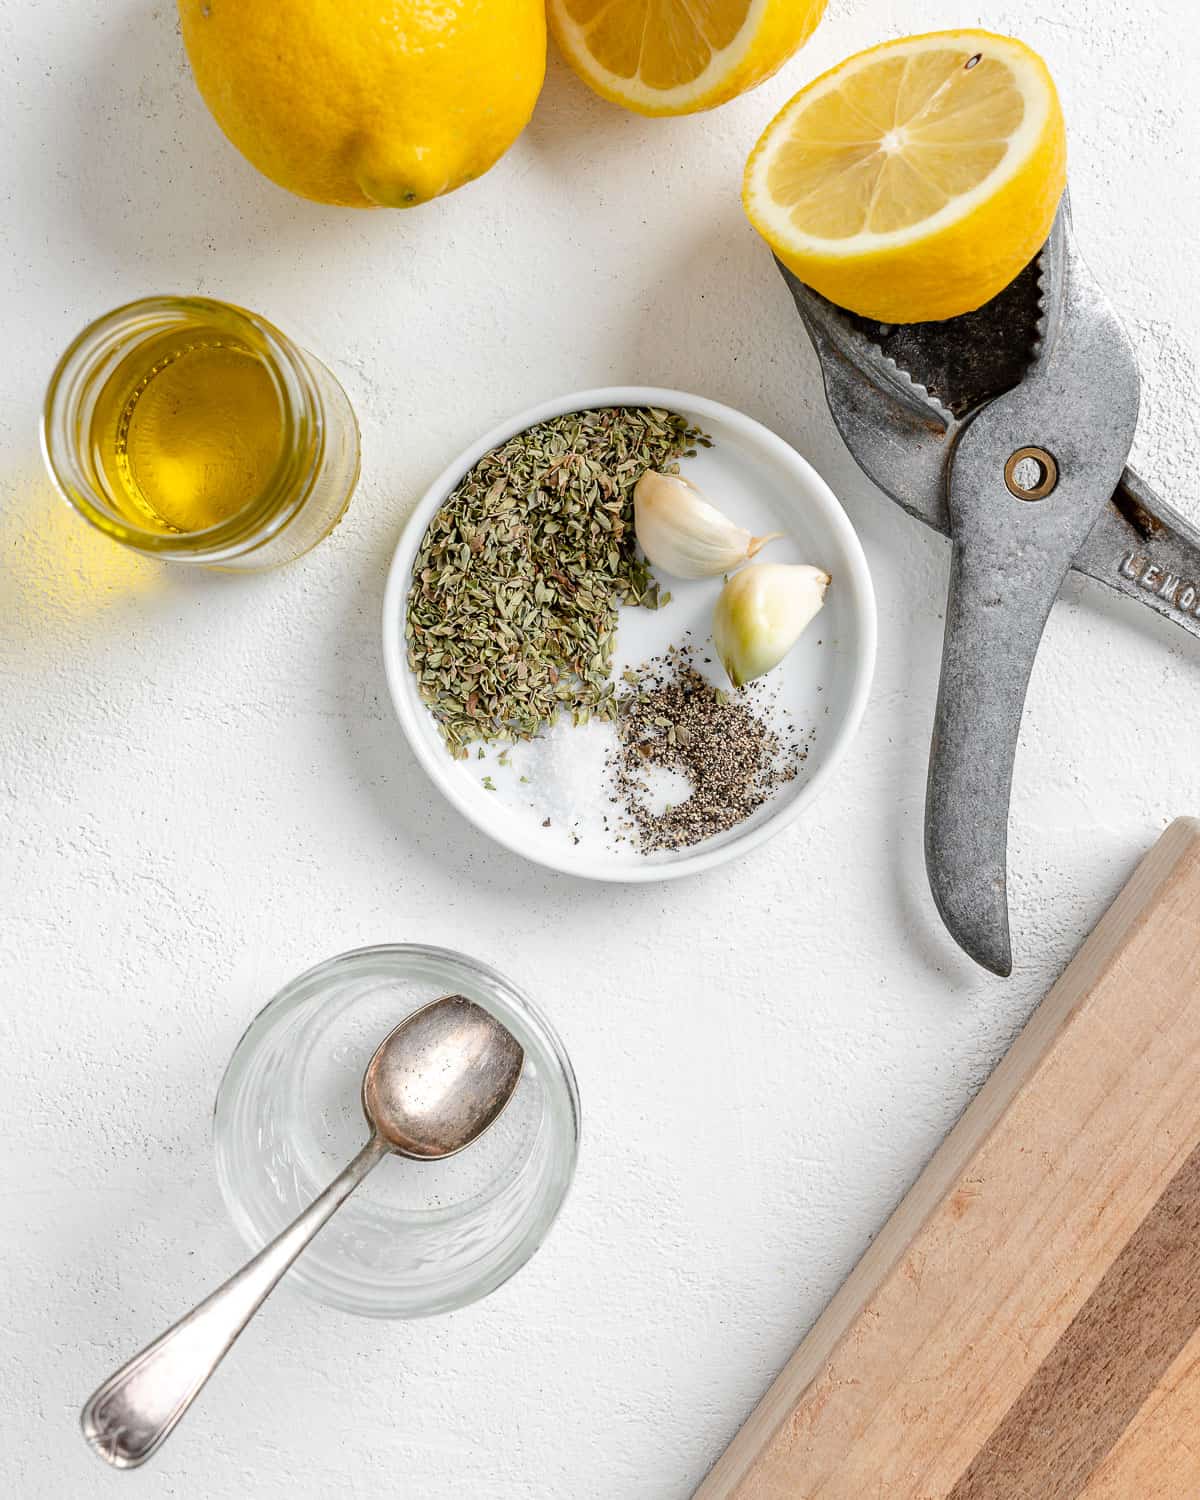 process of mixing spices and lemon into a small white bowl against a white background